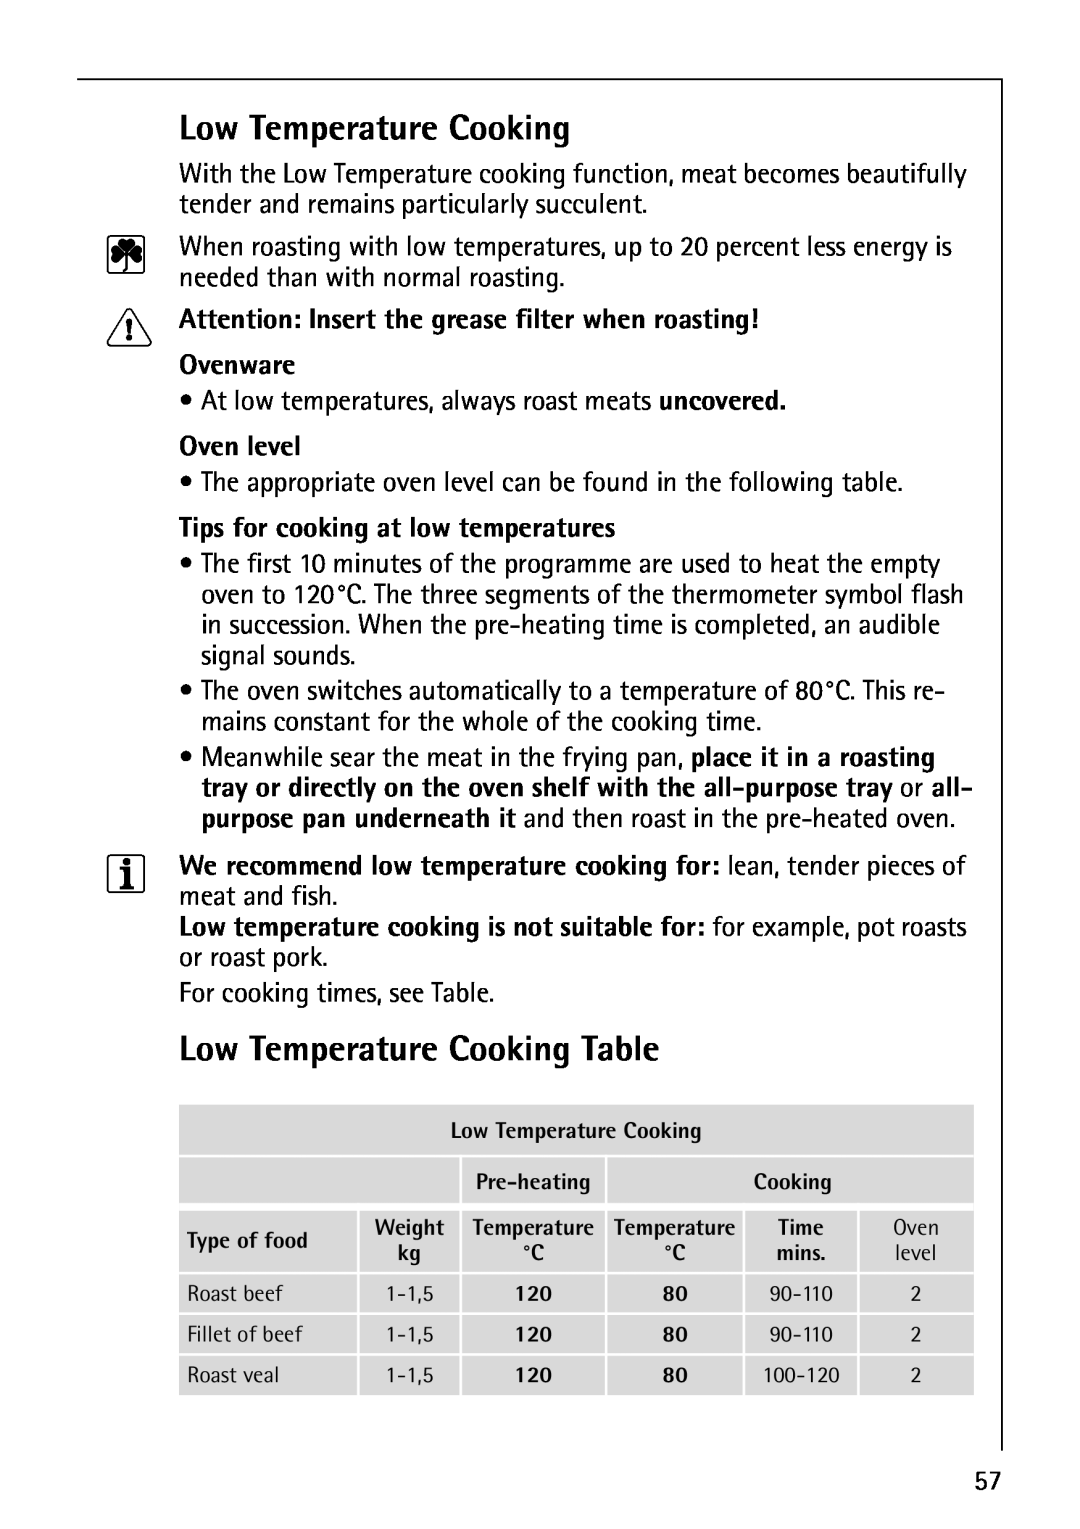 AEG B8920-1 Low Temperature Cooking Table, Attention: Insert the grease filter when roasting, Ovenware, Oven level 